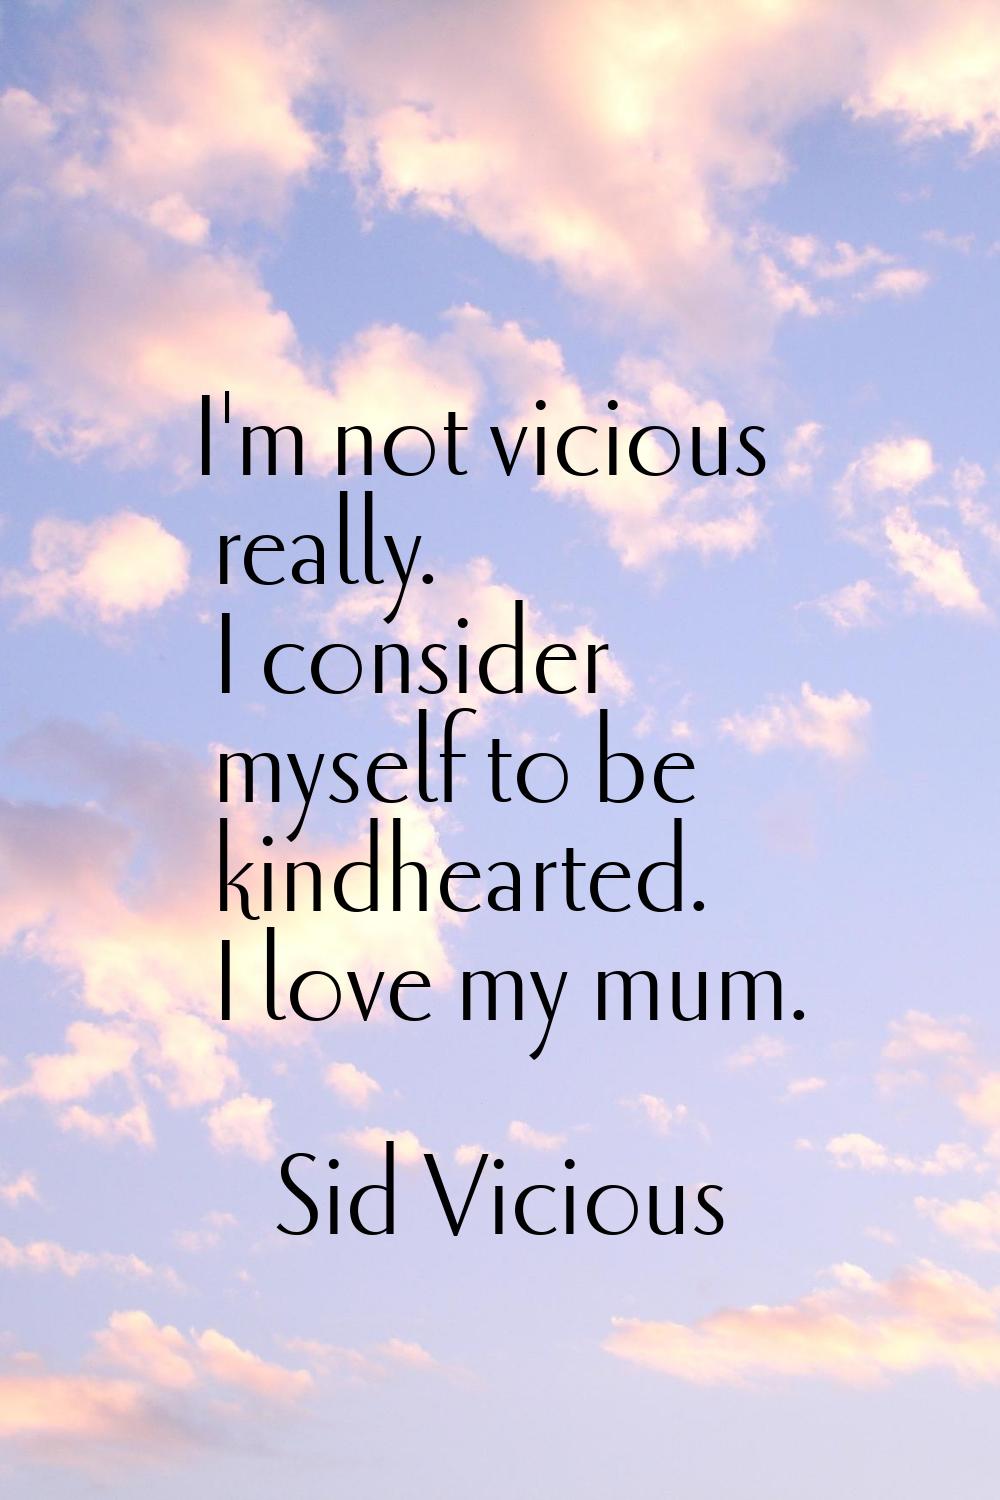 I'm not vicious really. I consider myself to be kindhearted. I love my mum.